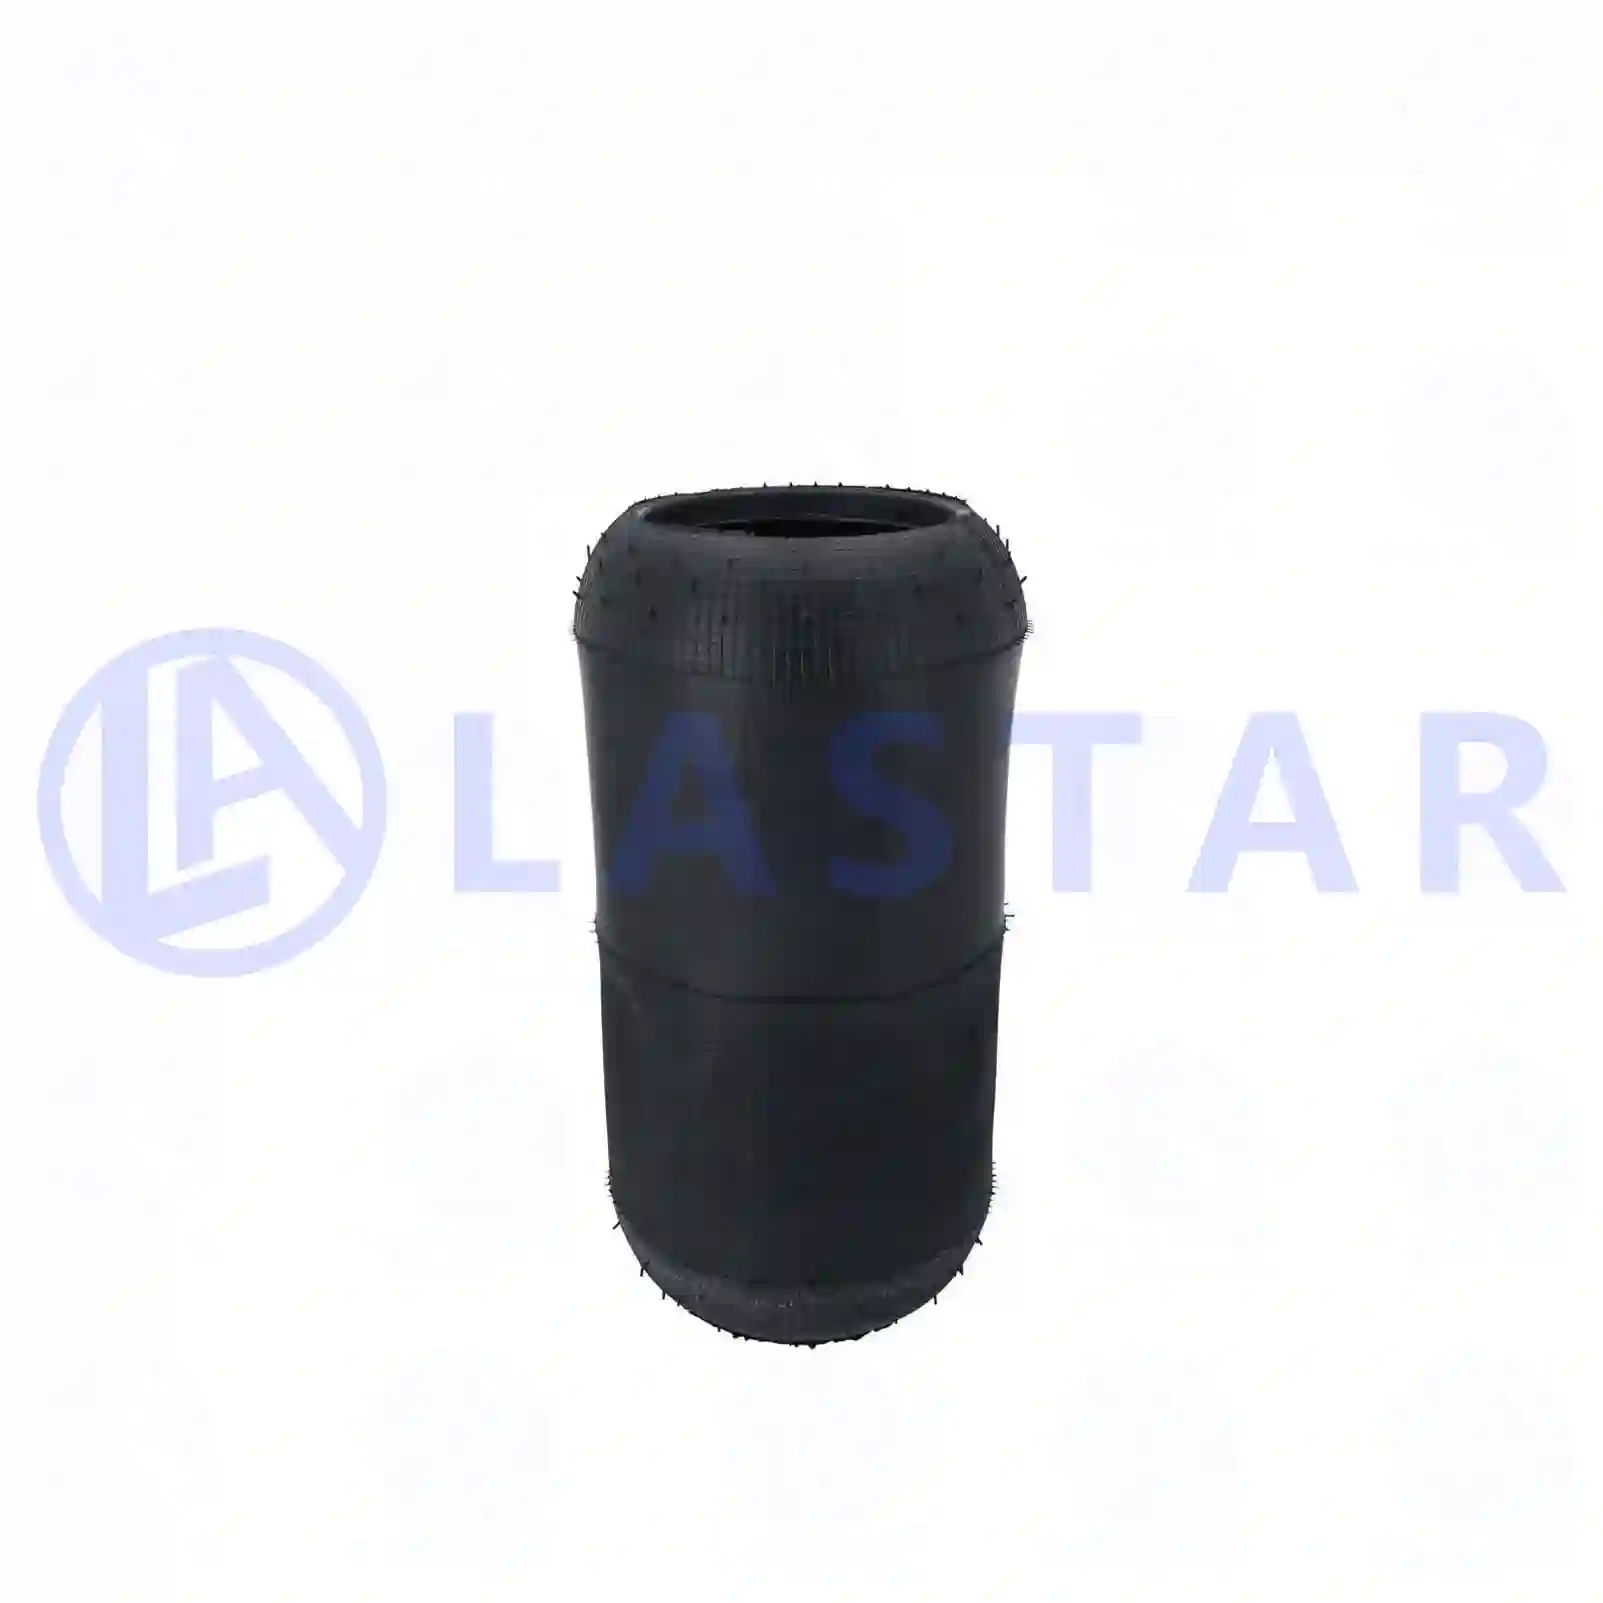 Air spring, without piston, 77729665, 20540792, 21347075, ZG40817-0008, ||  77729665 Lastar Spare Part | Truck Spare Parts, Auotomotive Spare Parts Air spring, without piston, 77729665, 20540792, 21347075, ZG40817-0008, ||  77729665 Lastar Spare Part | Truck Spare Parts, Auotomotive Spare Parts